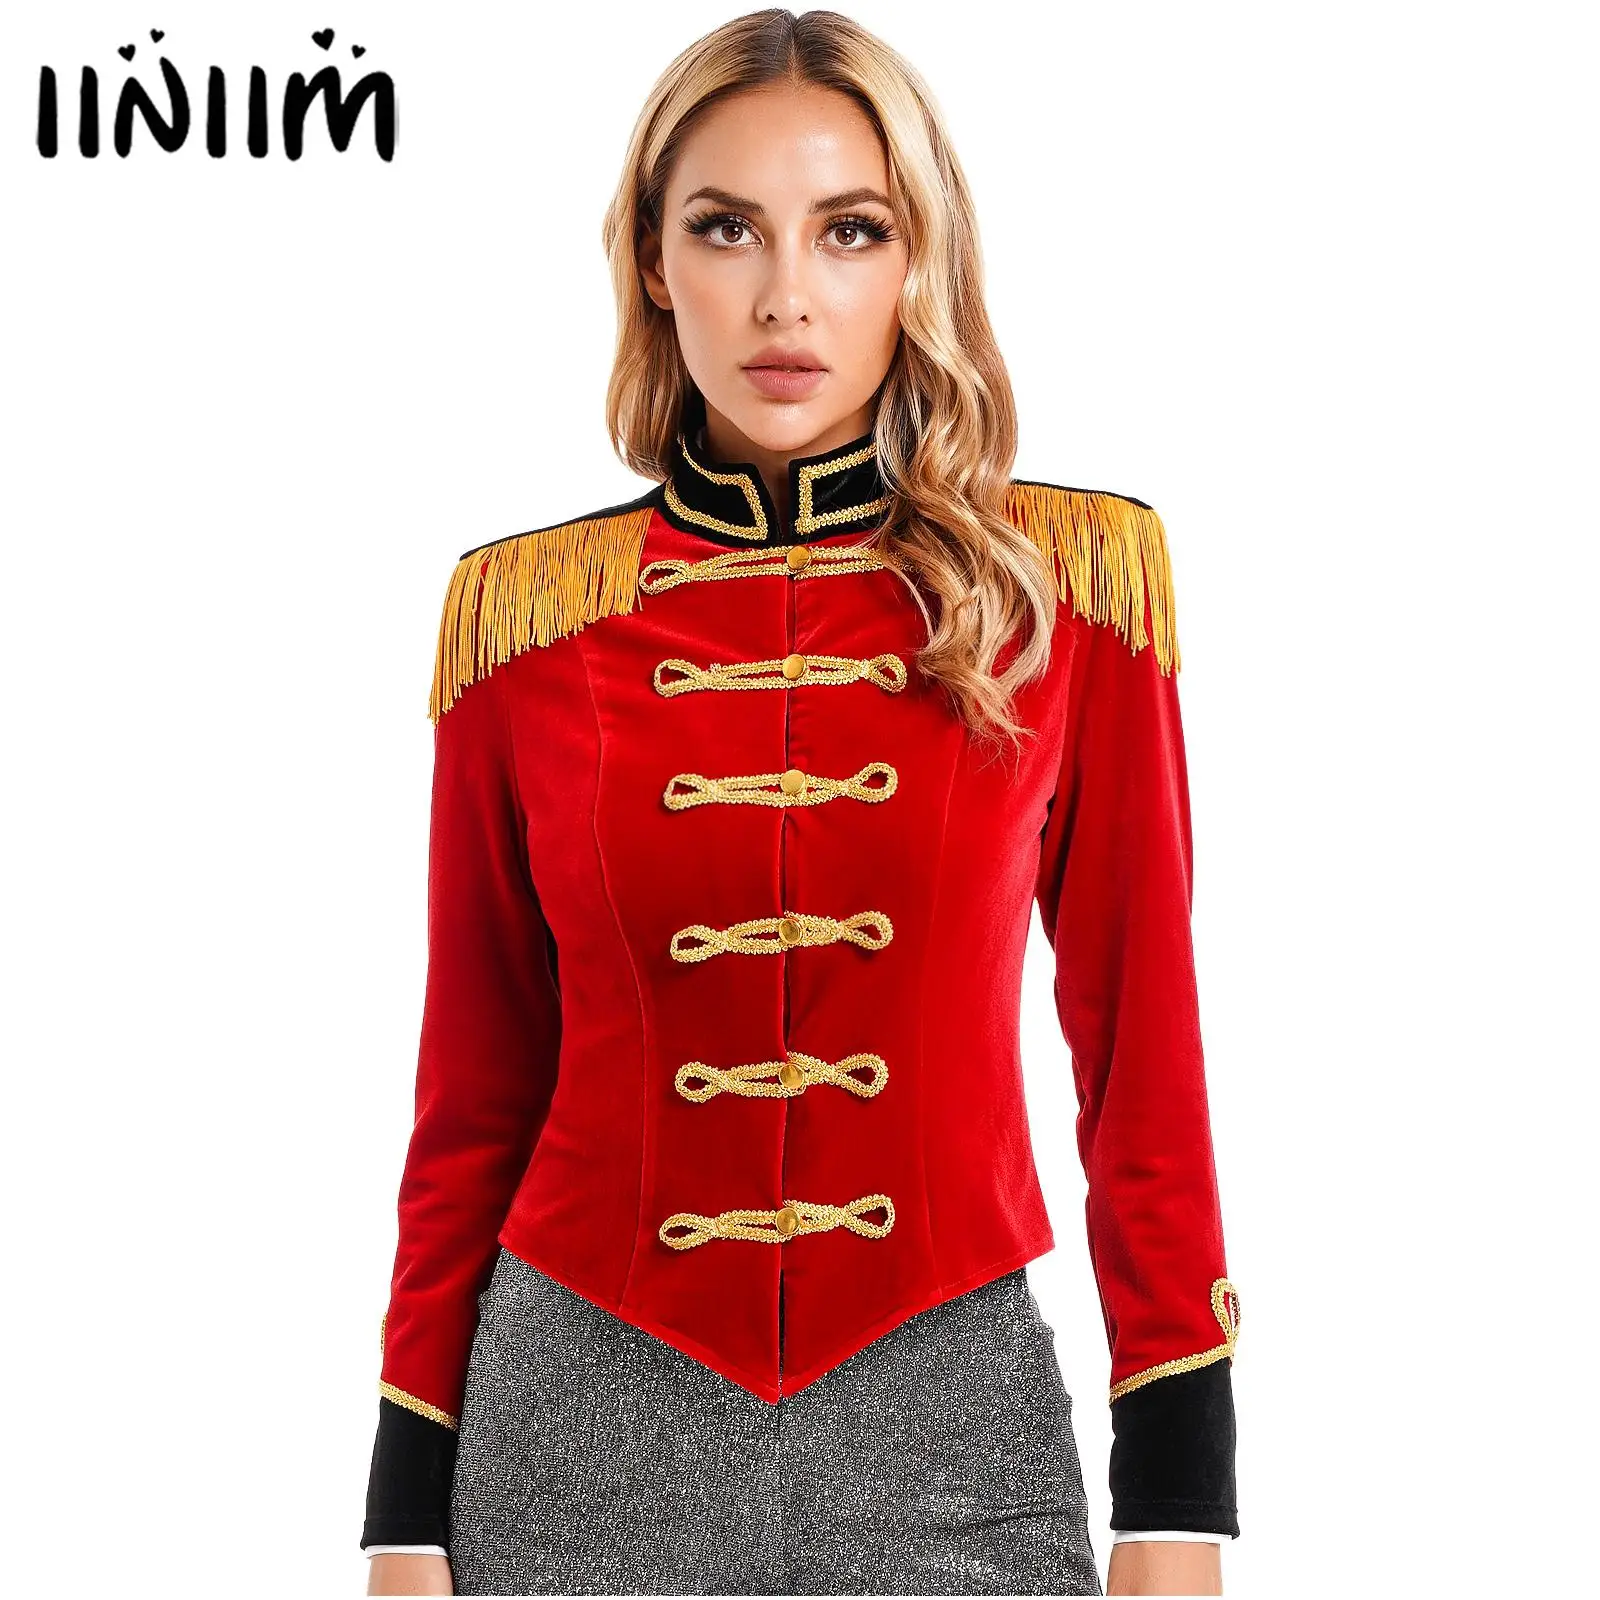 Womens Circus Ringmaster Costume Halloween Cosplay Costume Stand Collar Fringed Shoulder Board Velvet Jacket Coat costume ironing board household foldable clothing folding tabletop boards bucket rest travel donkey